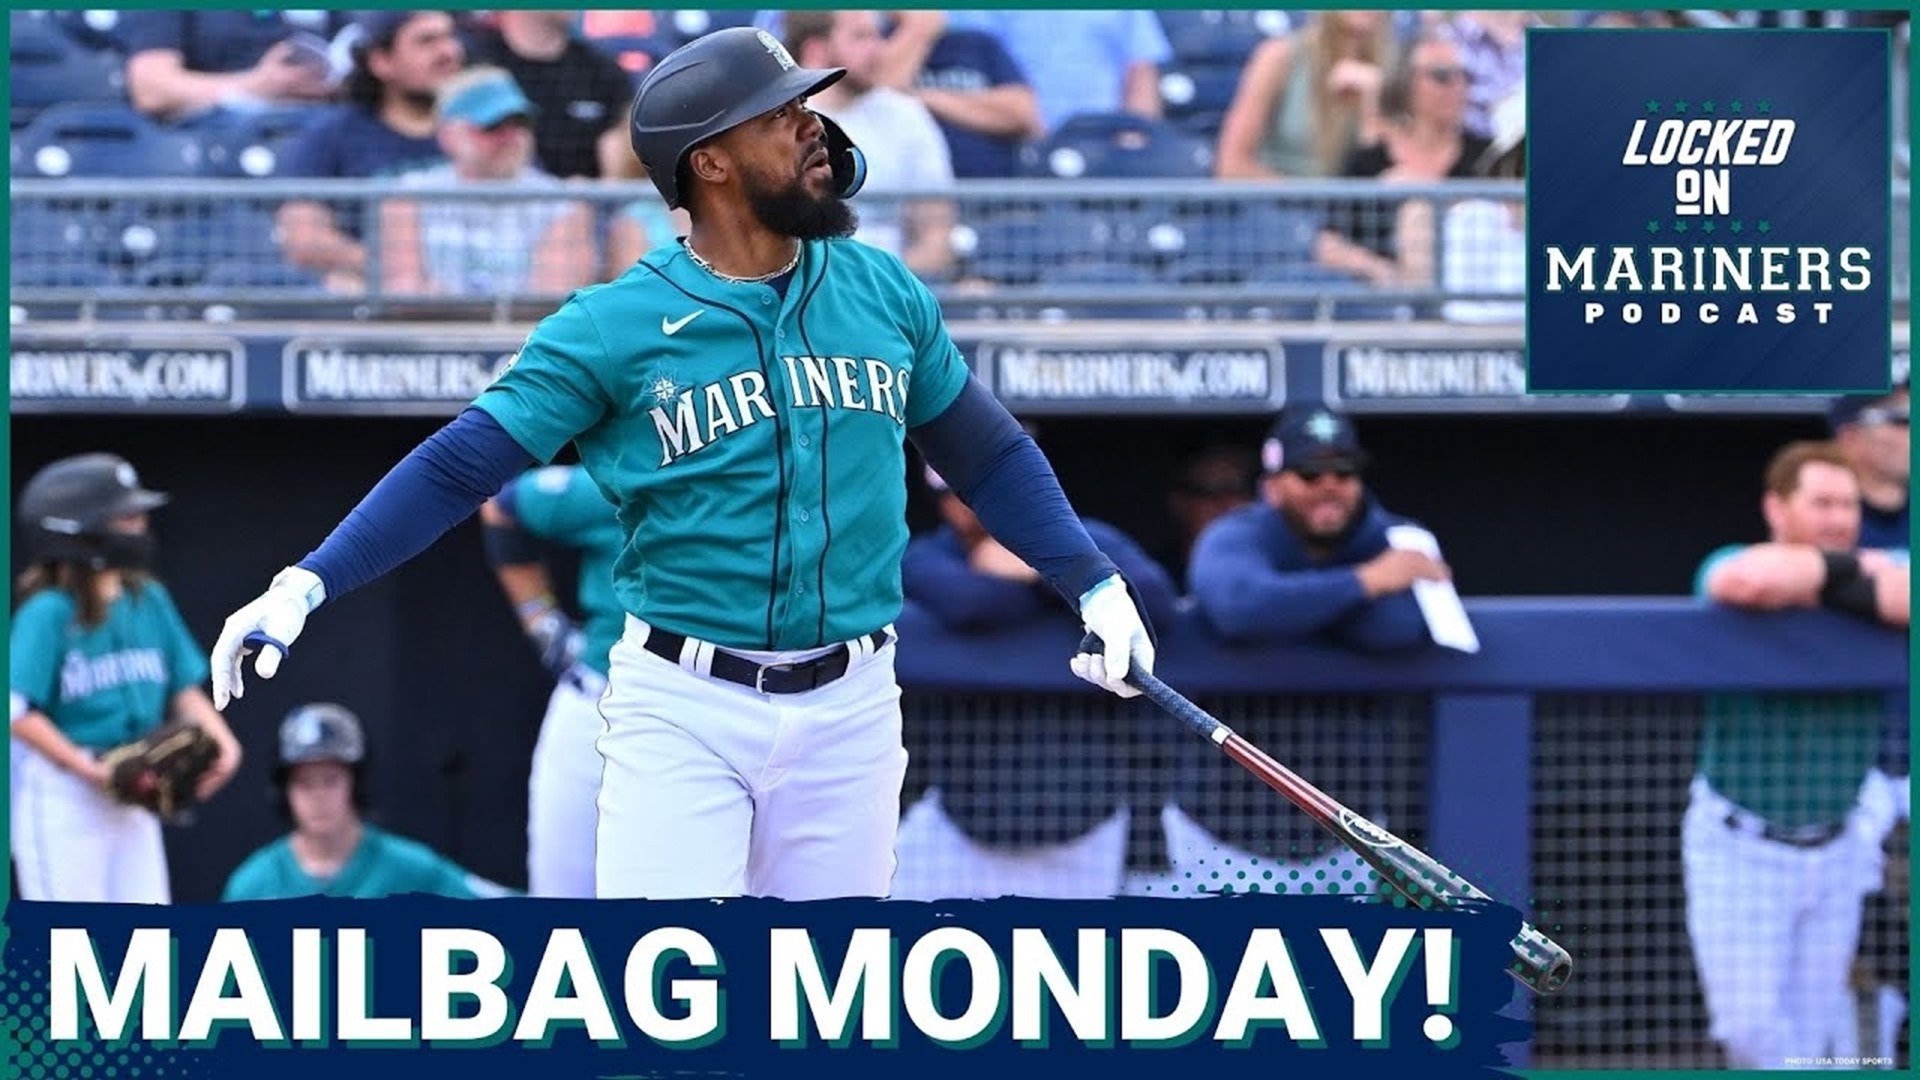 It's a late-night Mailbag Monday from Ty and Colby! On the show, the boys answer some listener questions about potential player regressions in 2023.